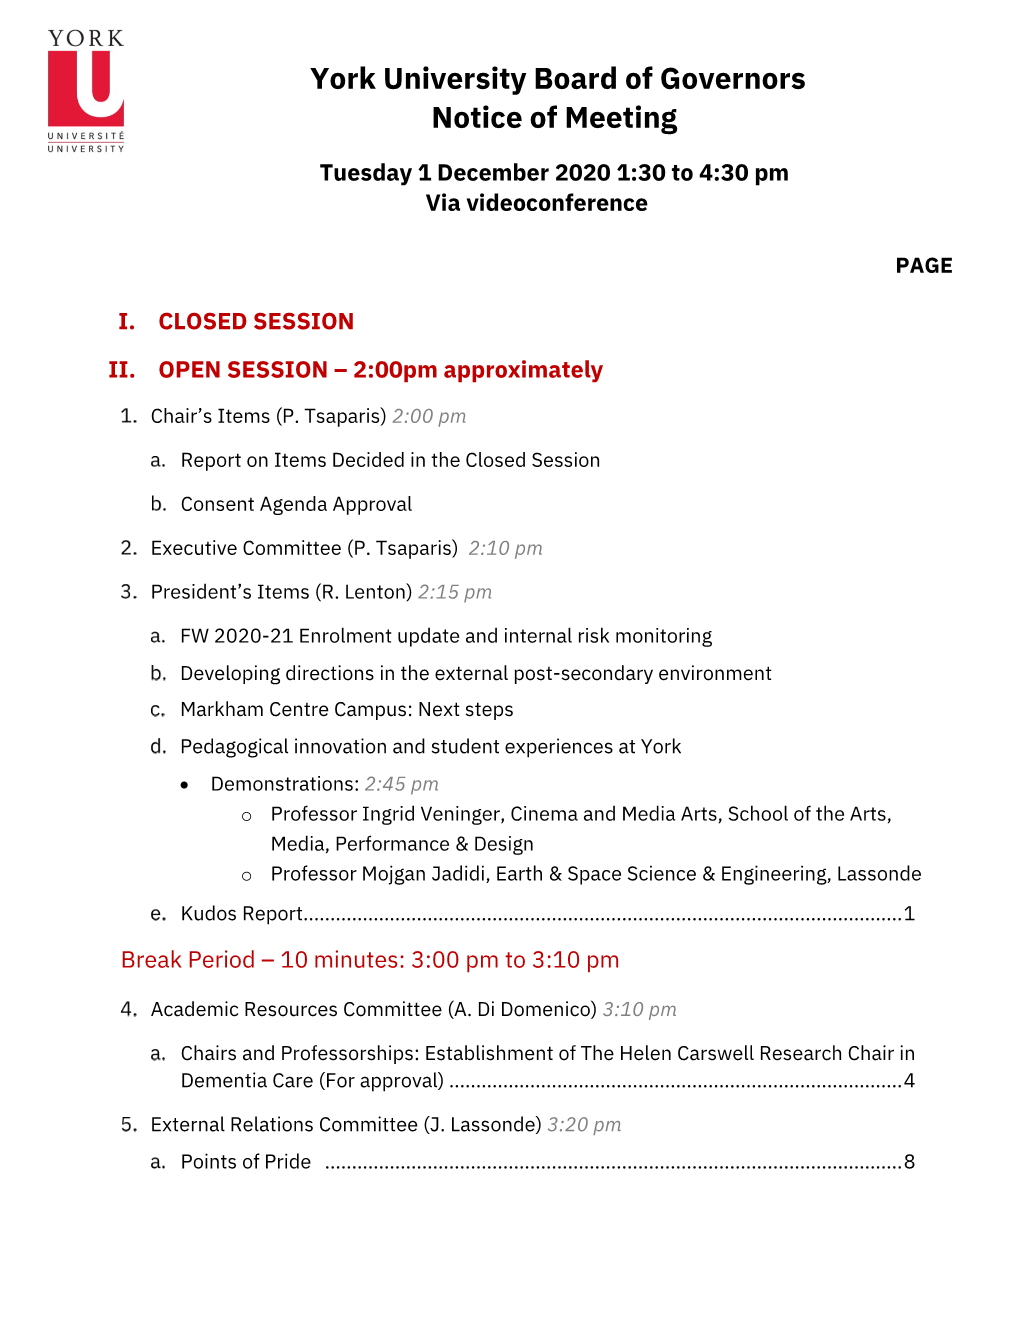 York University Board of Governors Notice of Meeting